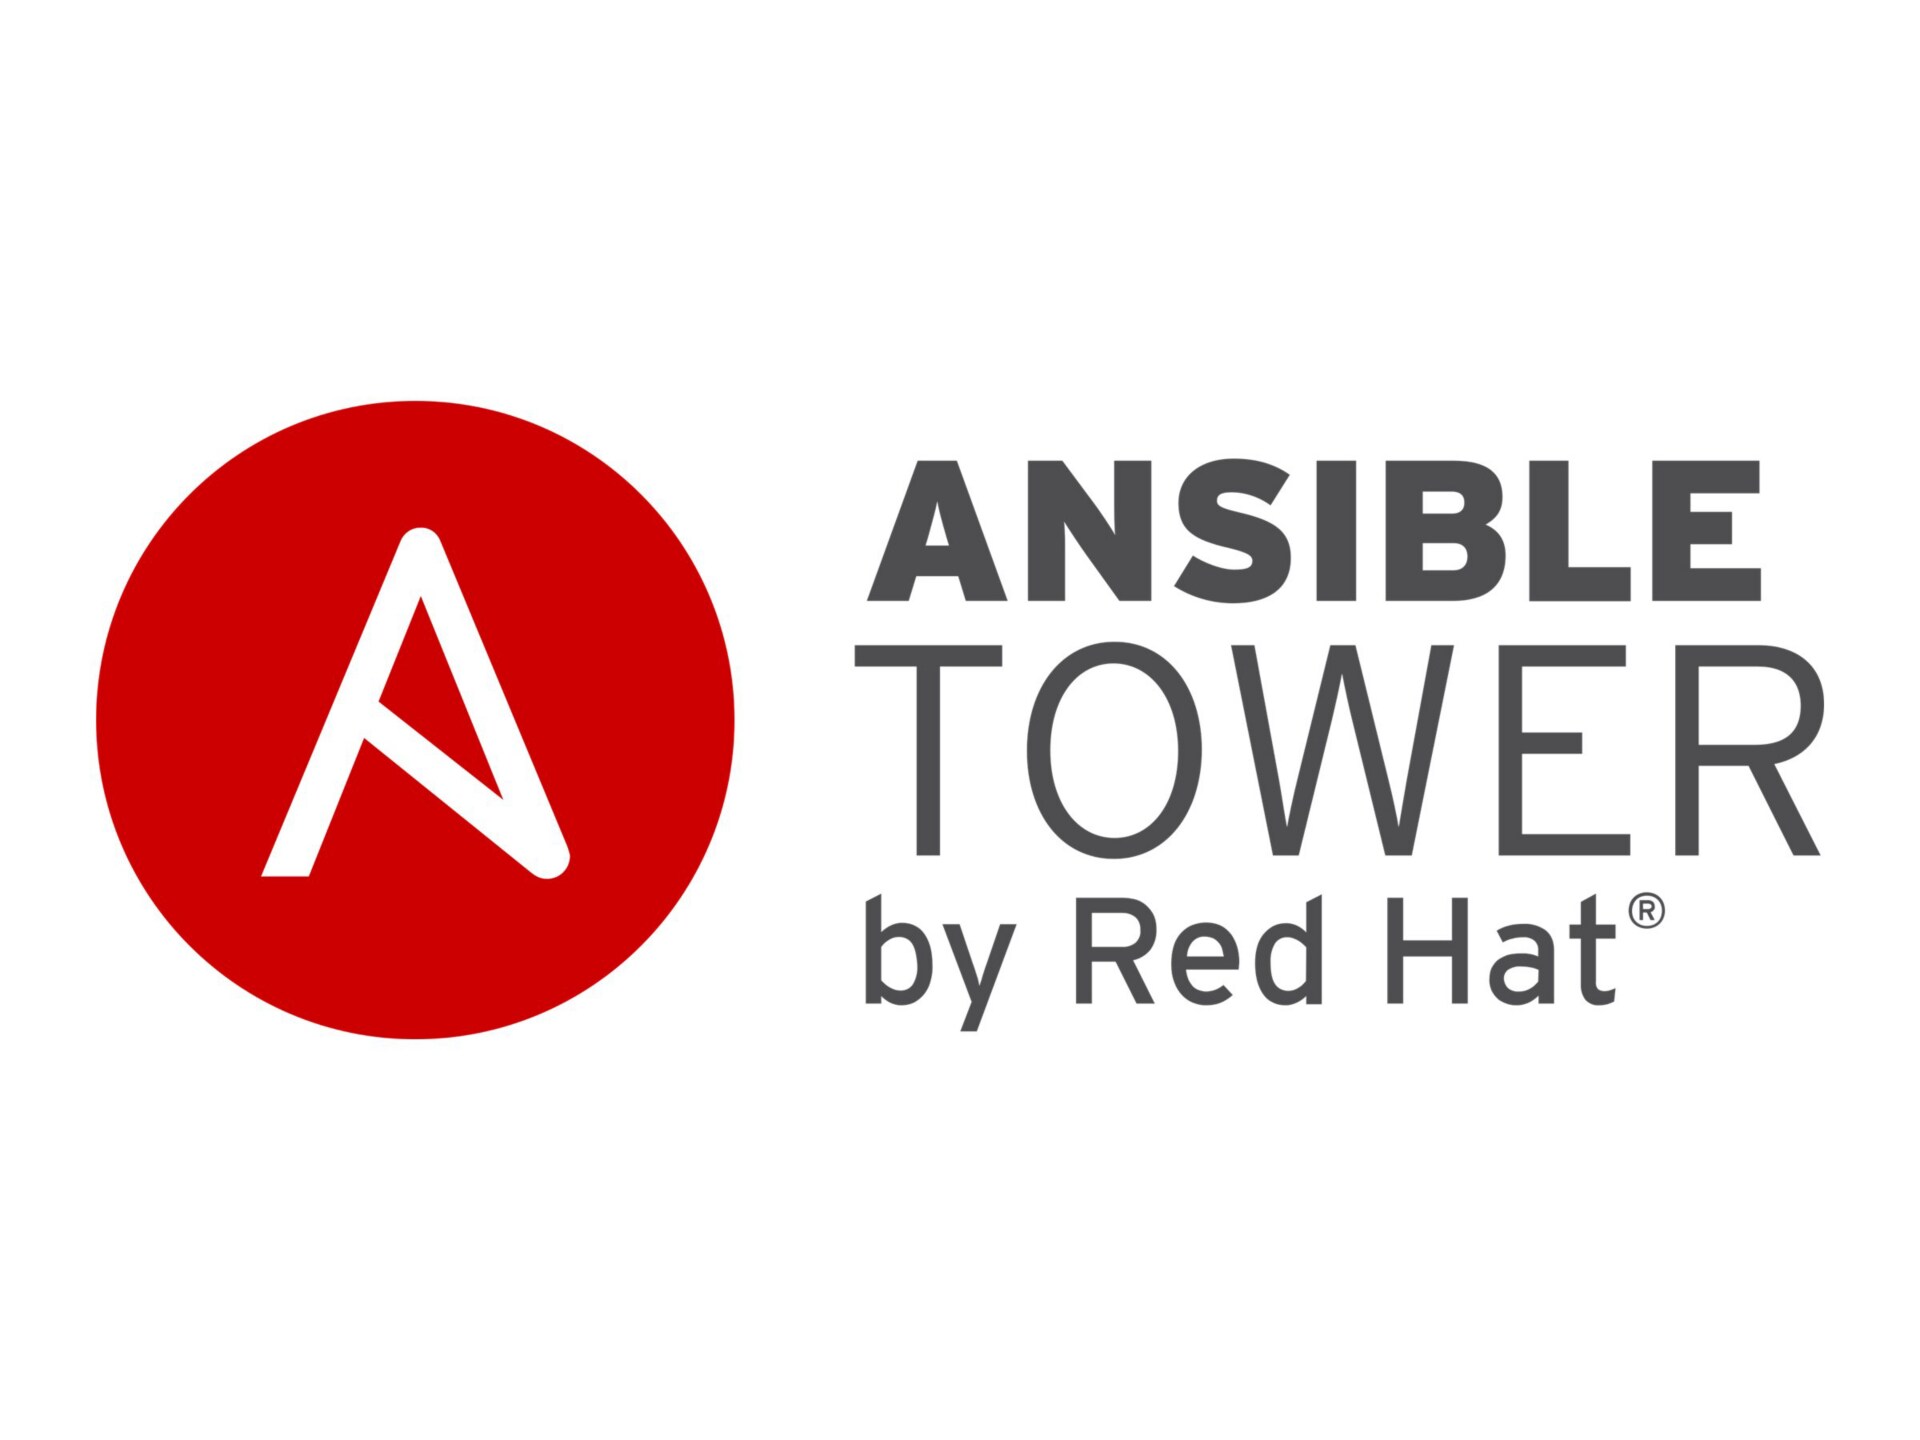 Red Hat Ansible Automation Platform - standard subscription (1 year) - 100